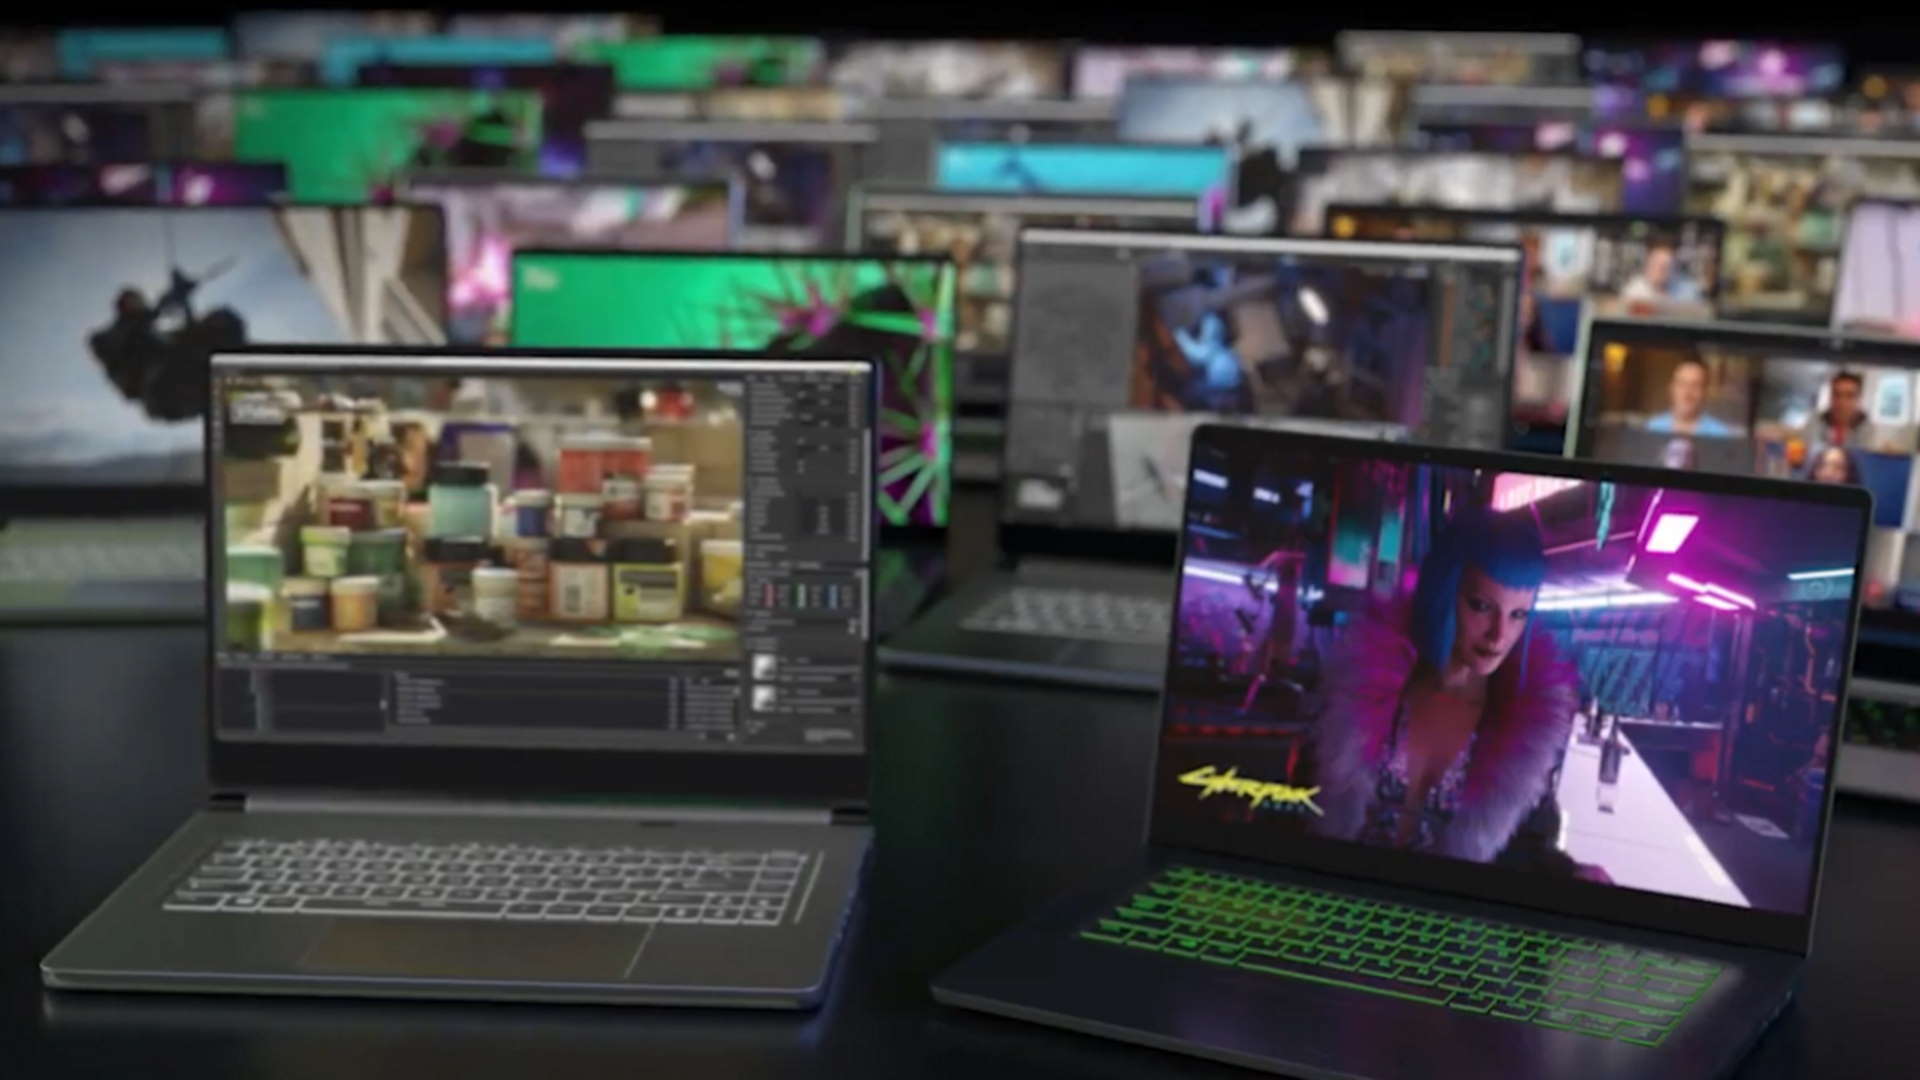 Nvidia's $999 RTX 3060 laptops offer 30 percent higher performance than a PS5 | PC Gamer